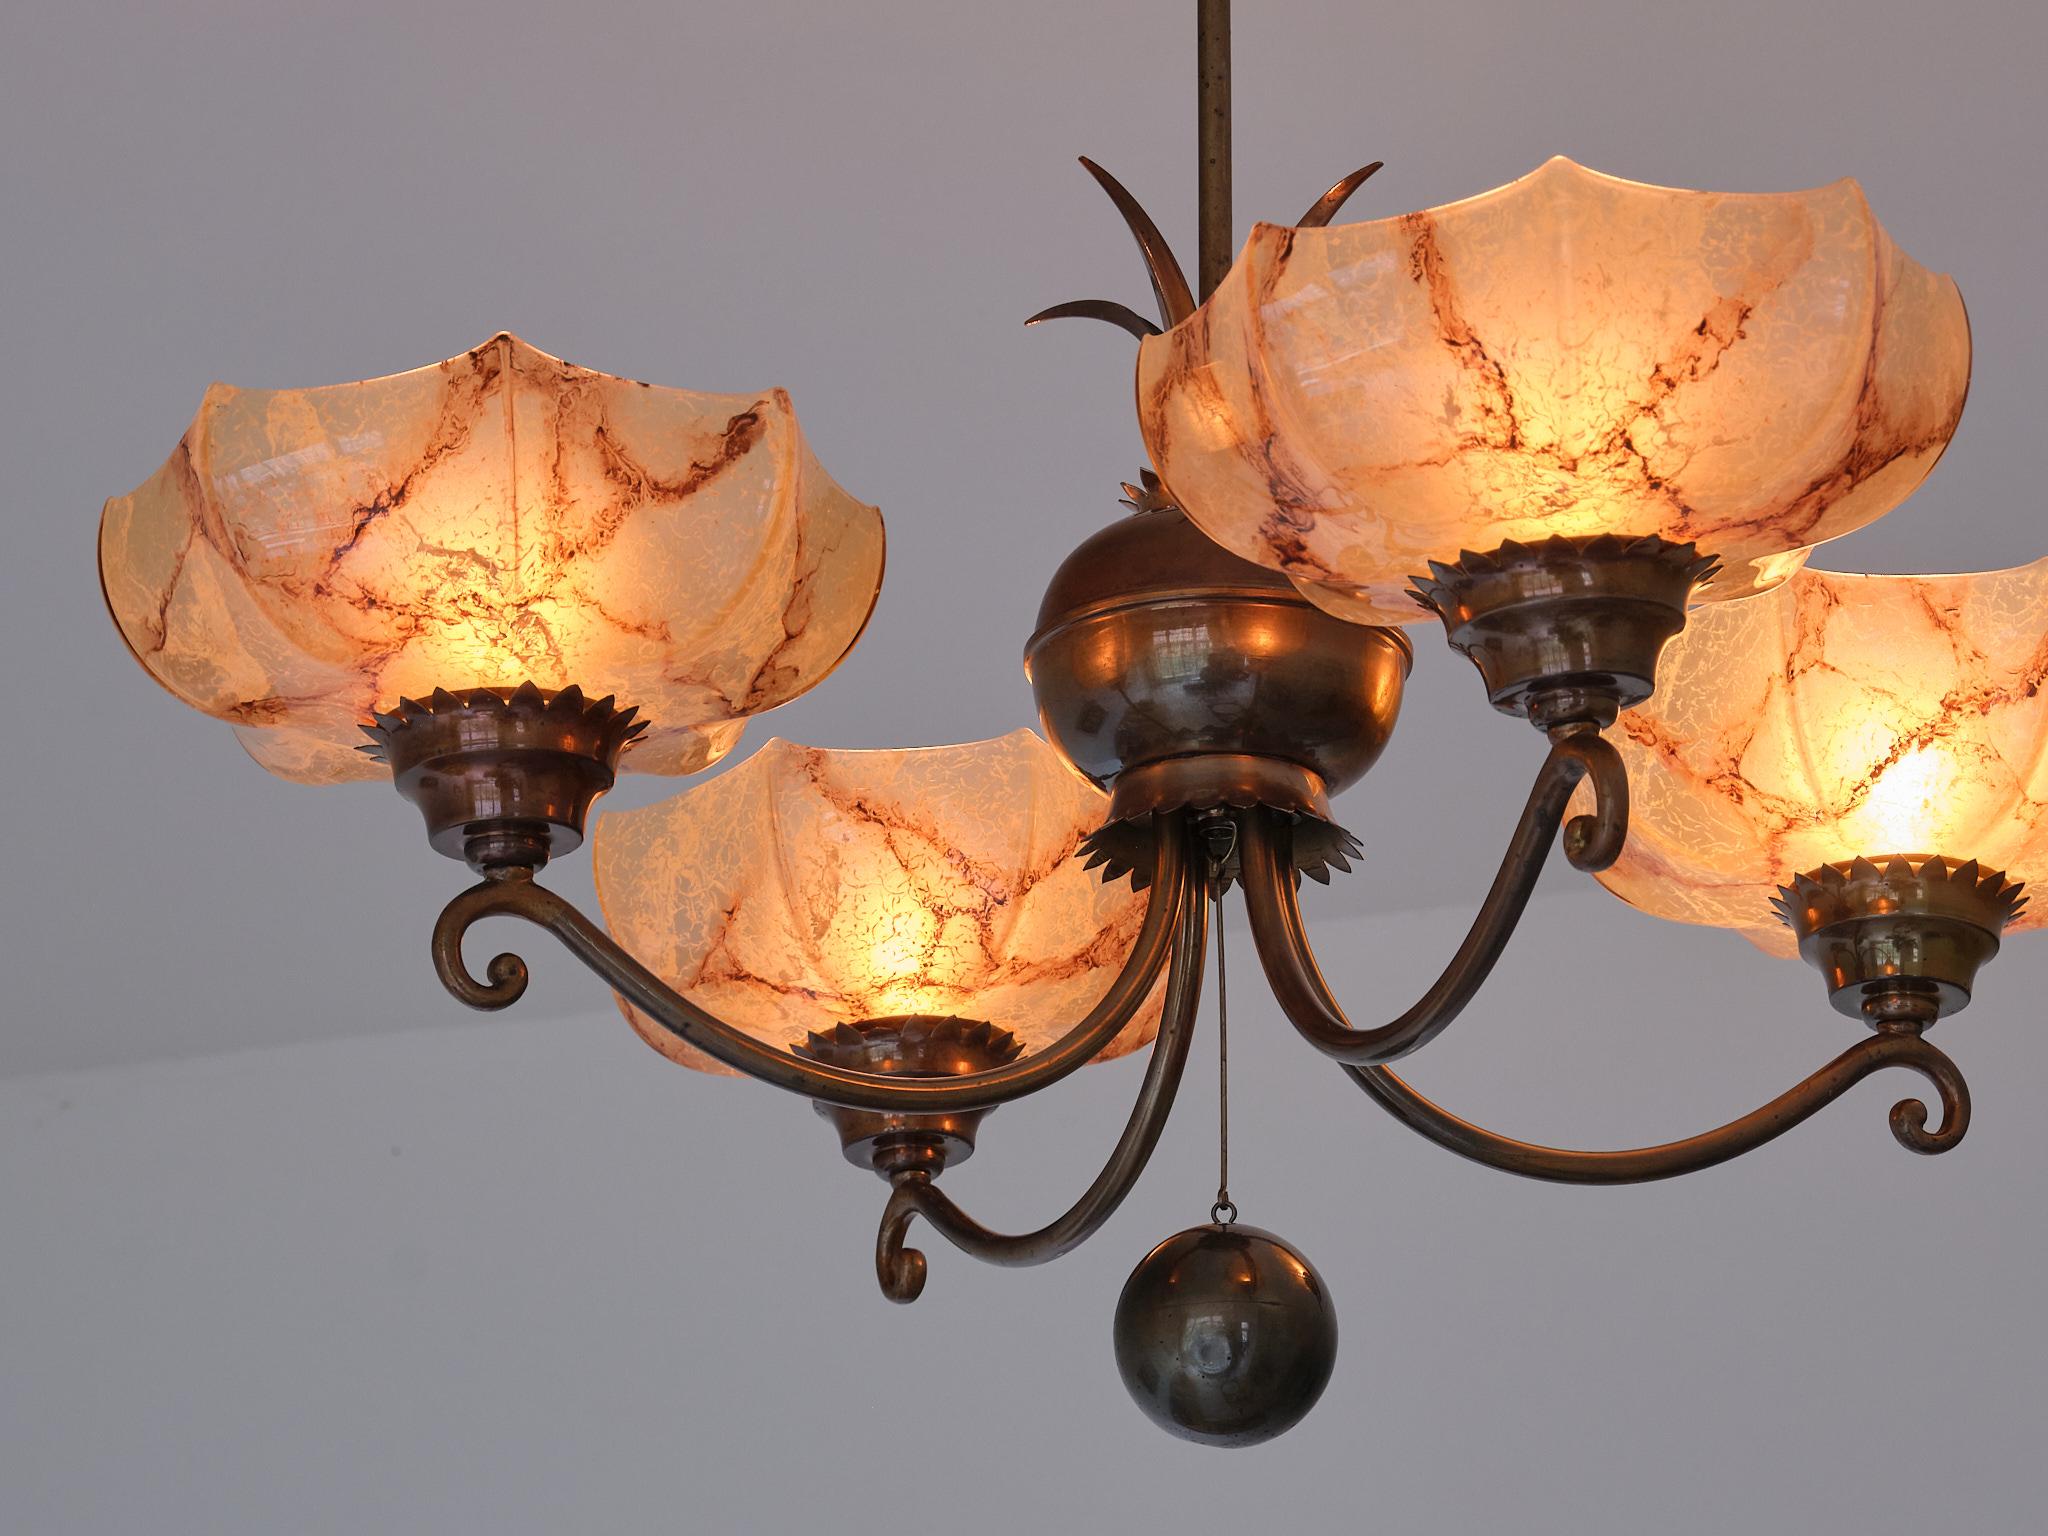 Harald Notini Chandelier in Brass and Marbled Glass, Böhlmarks, Sweden, 1927 For Sale 3